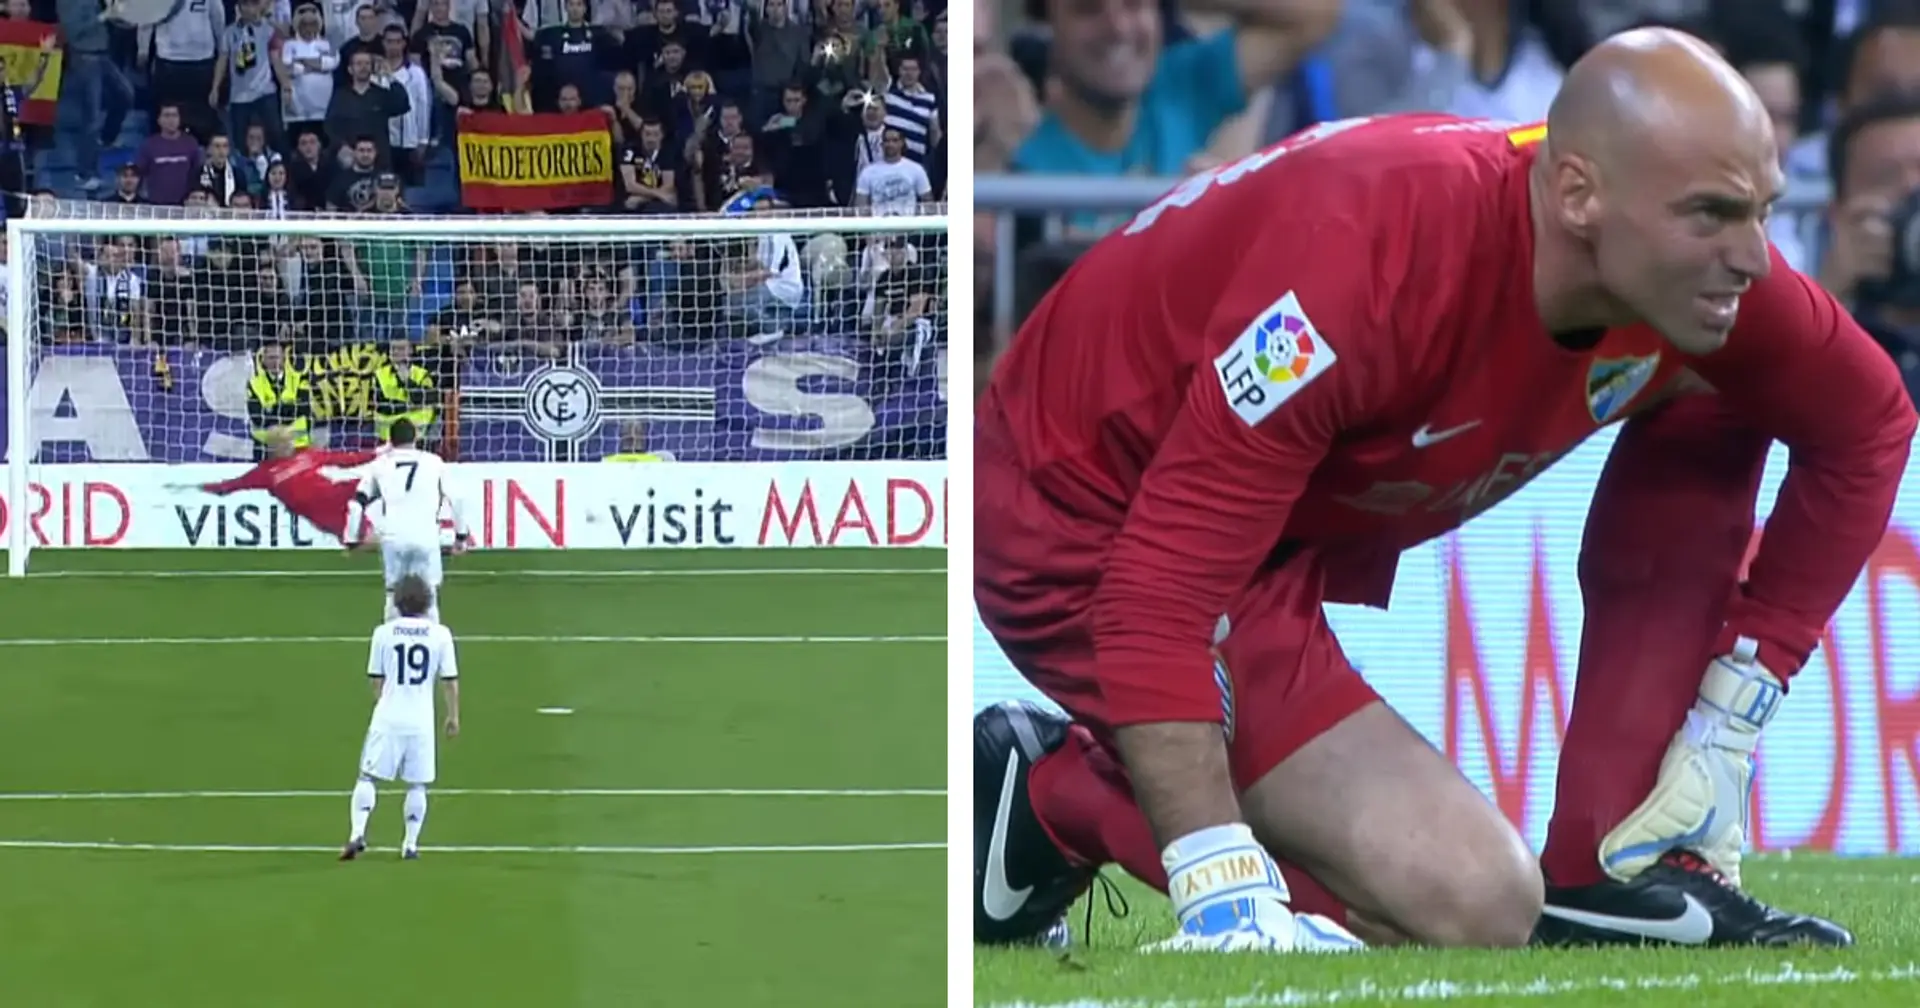 How Cristiano Ronaldo once injured goalkeeper with his penalty in crazy game (video)